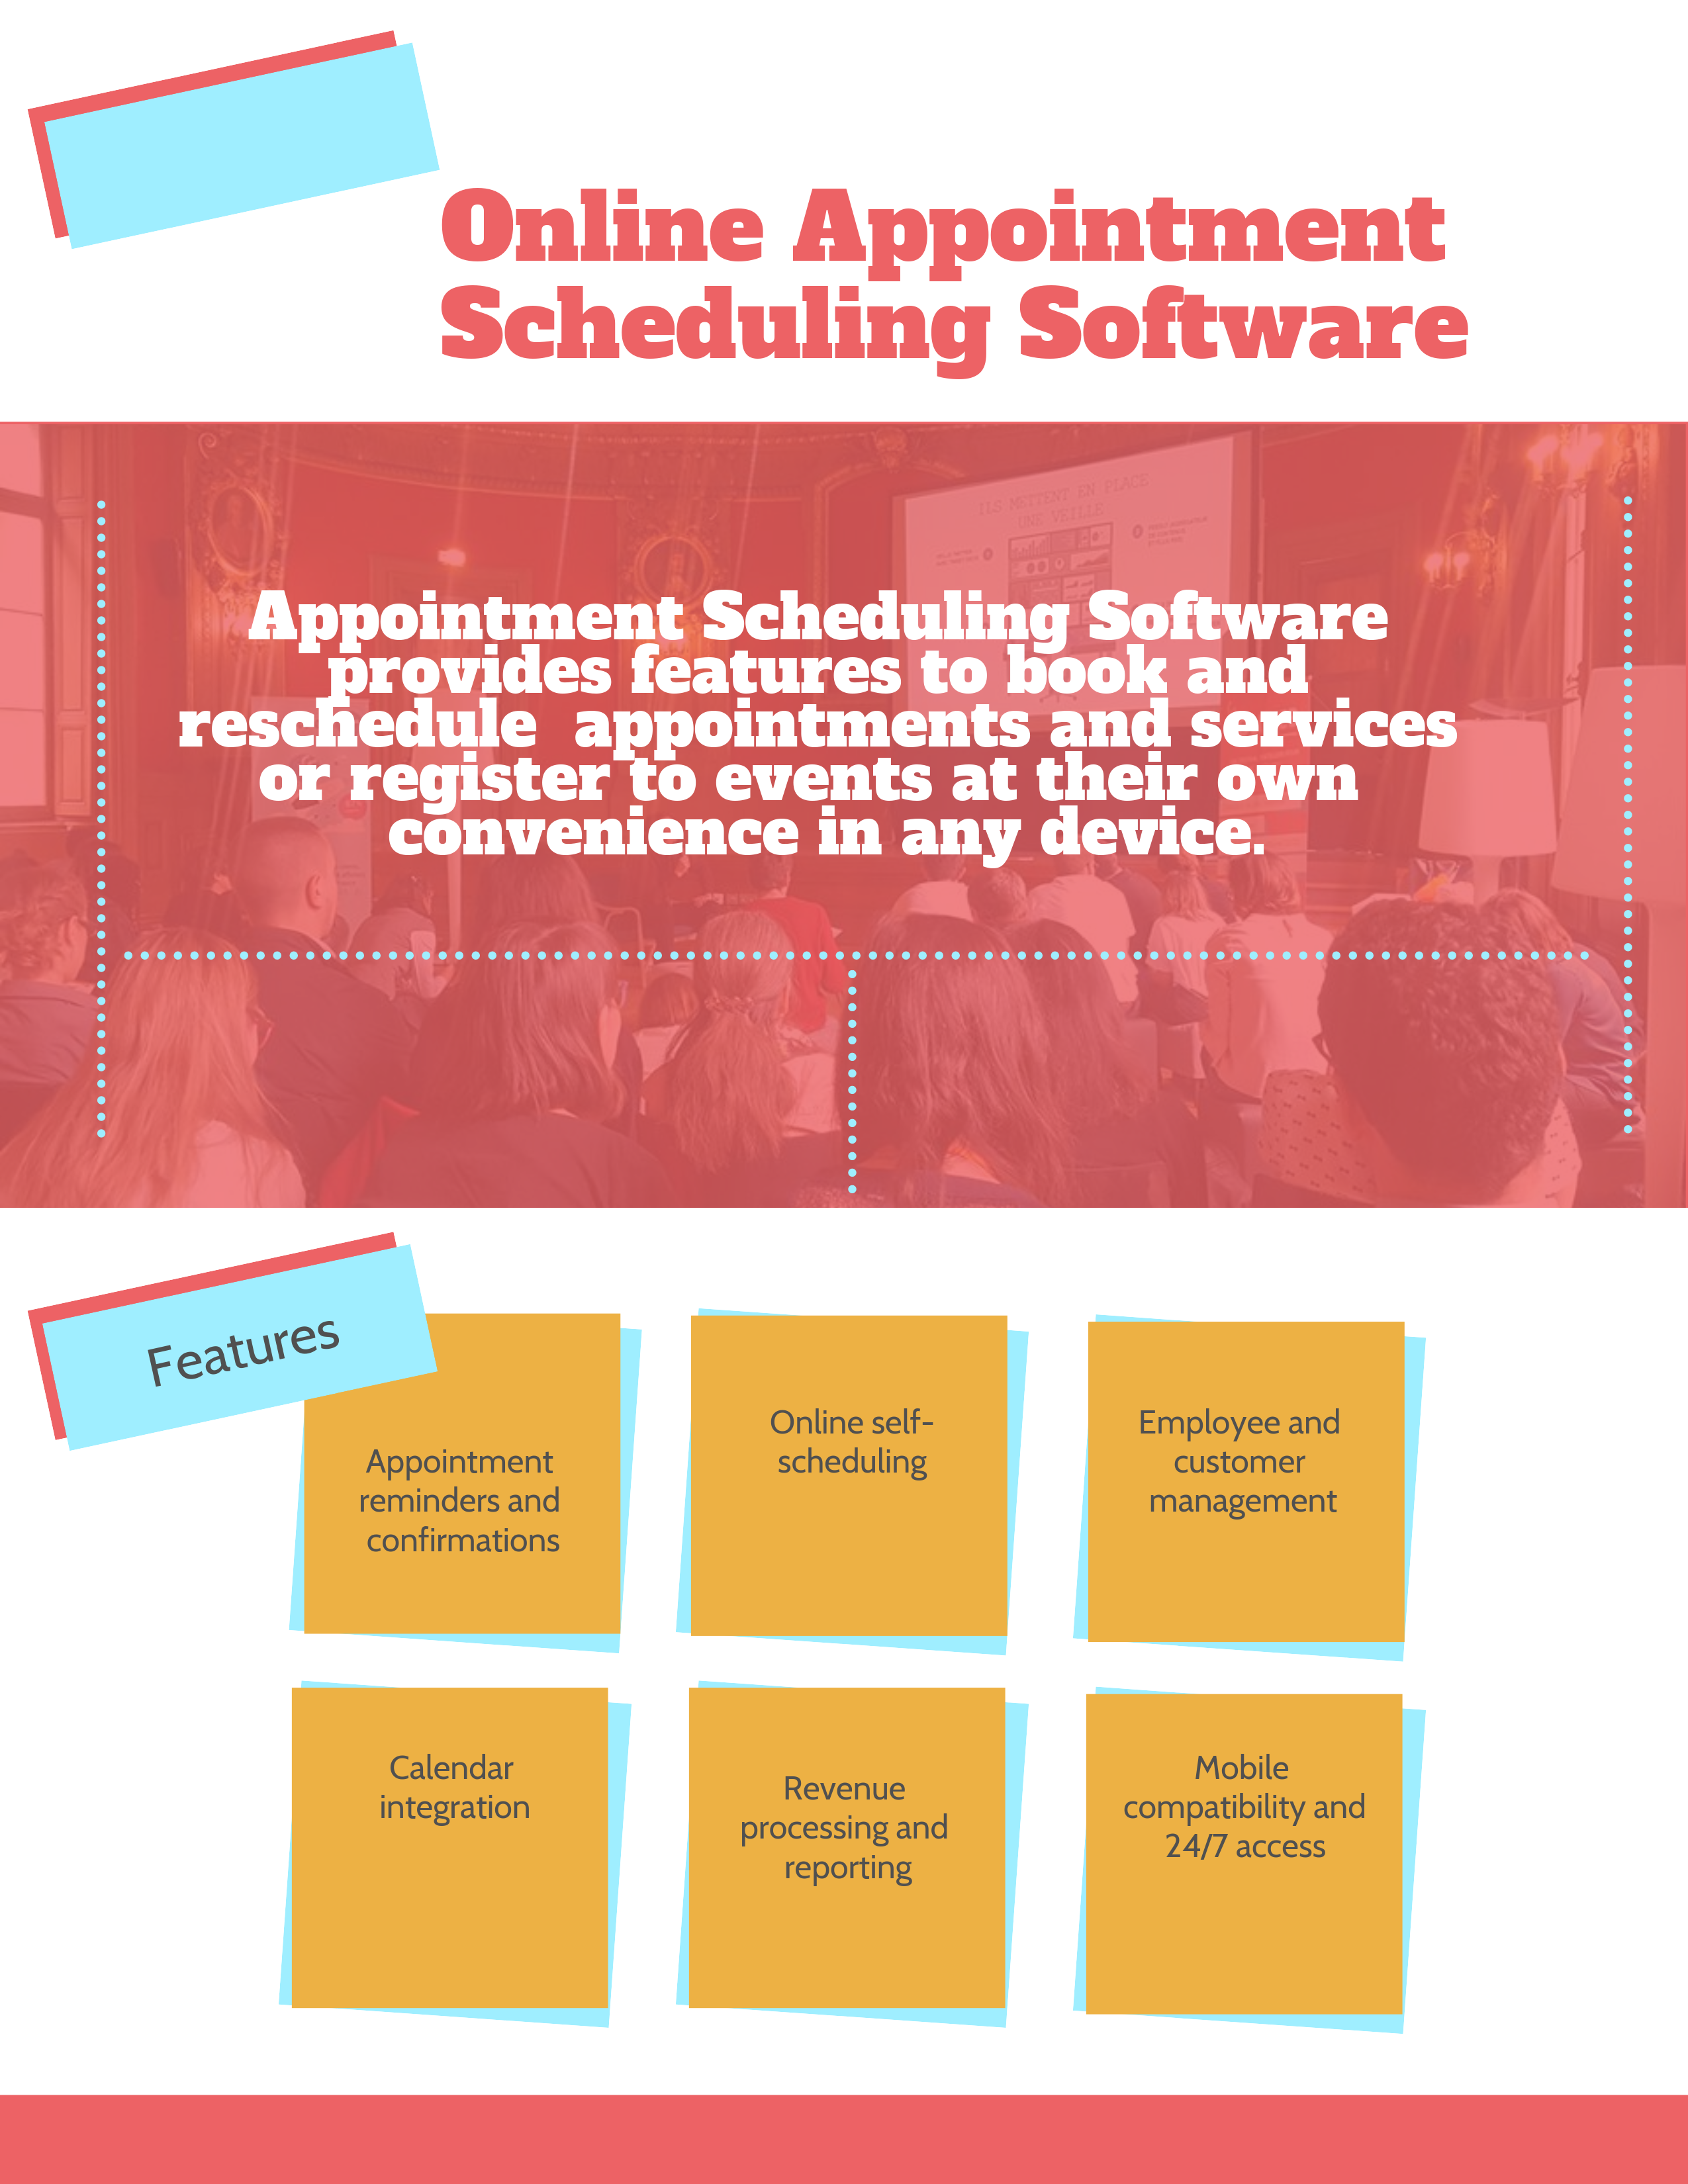 Top 10 Online Appointment Scheduling Software In 2021 Reviews Features Pricing Comparison Pat Research B2b Reviews Buying Guides Best Practices